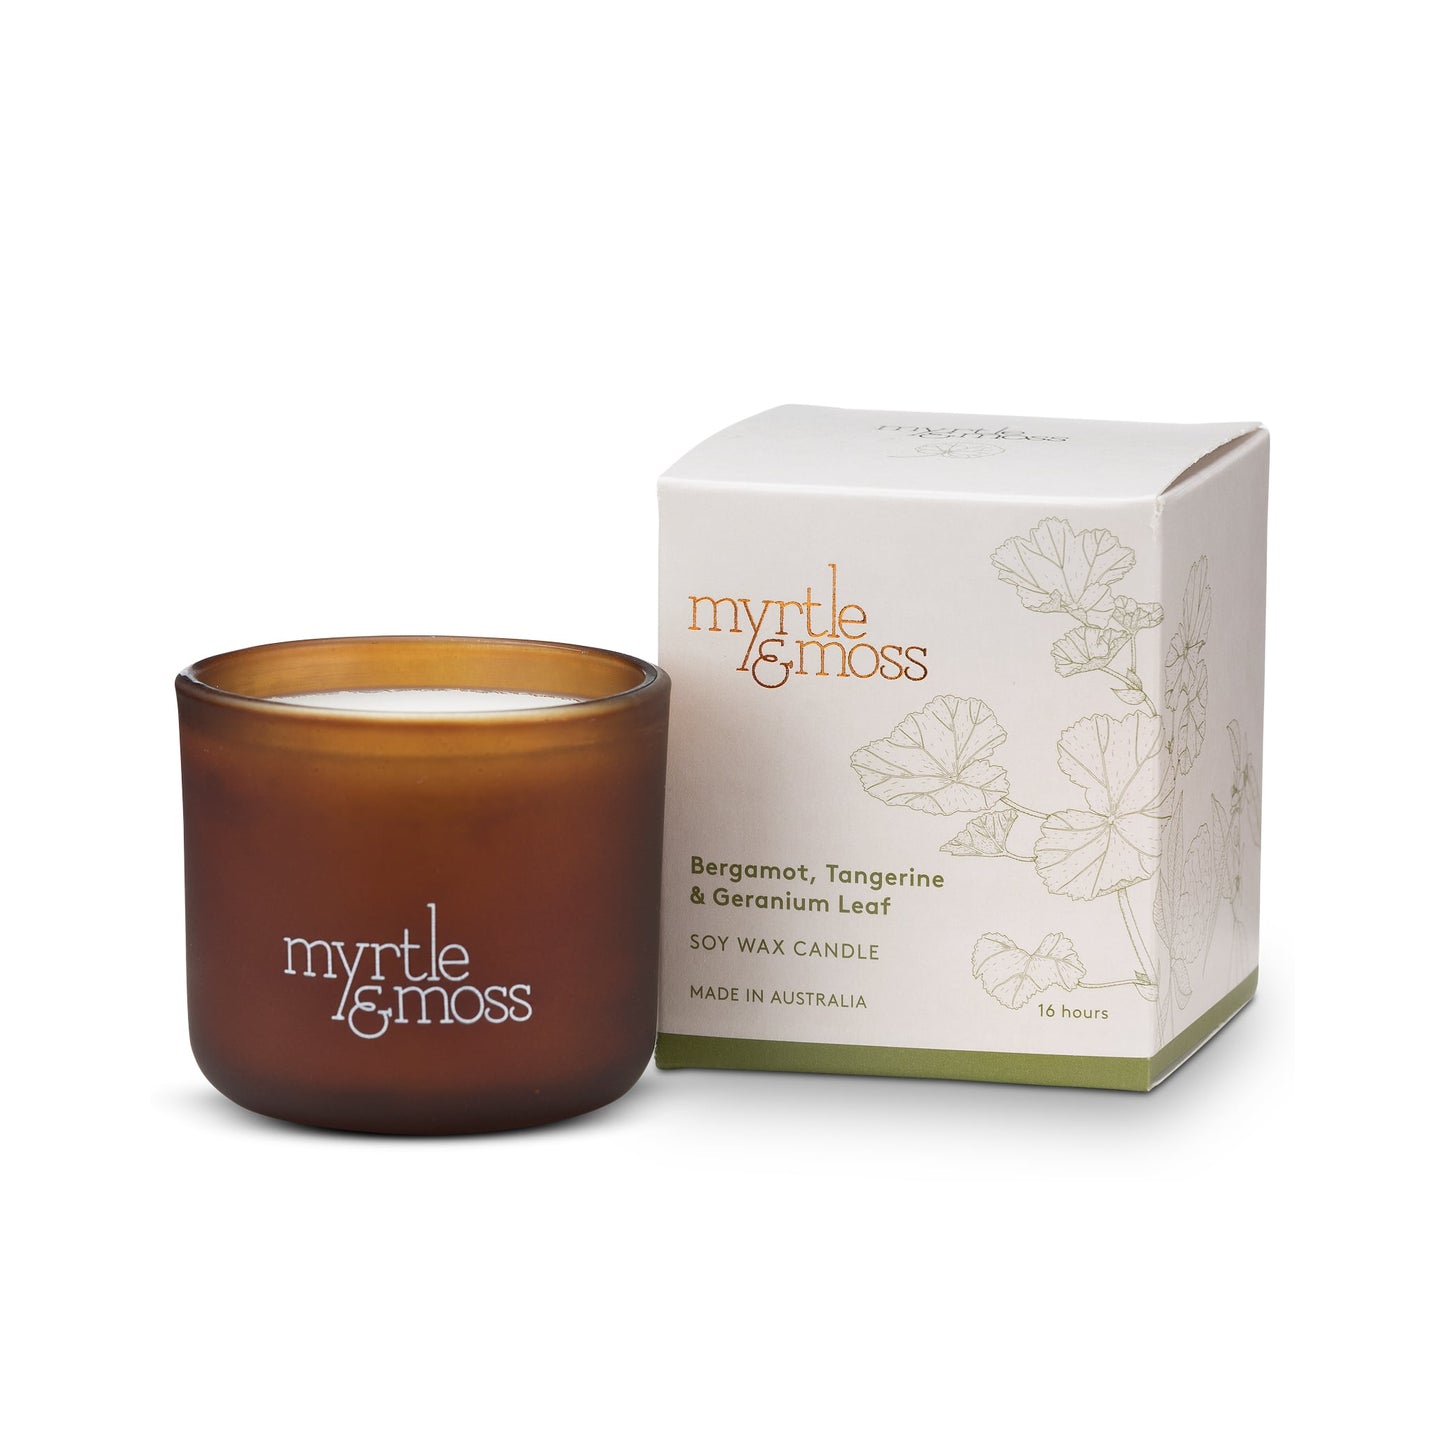 Myrtle and Moss 16hr Soy Wax Candle Bergamot, Tangerine and Geranium Leaf